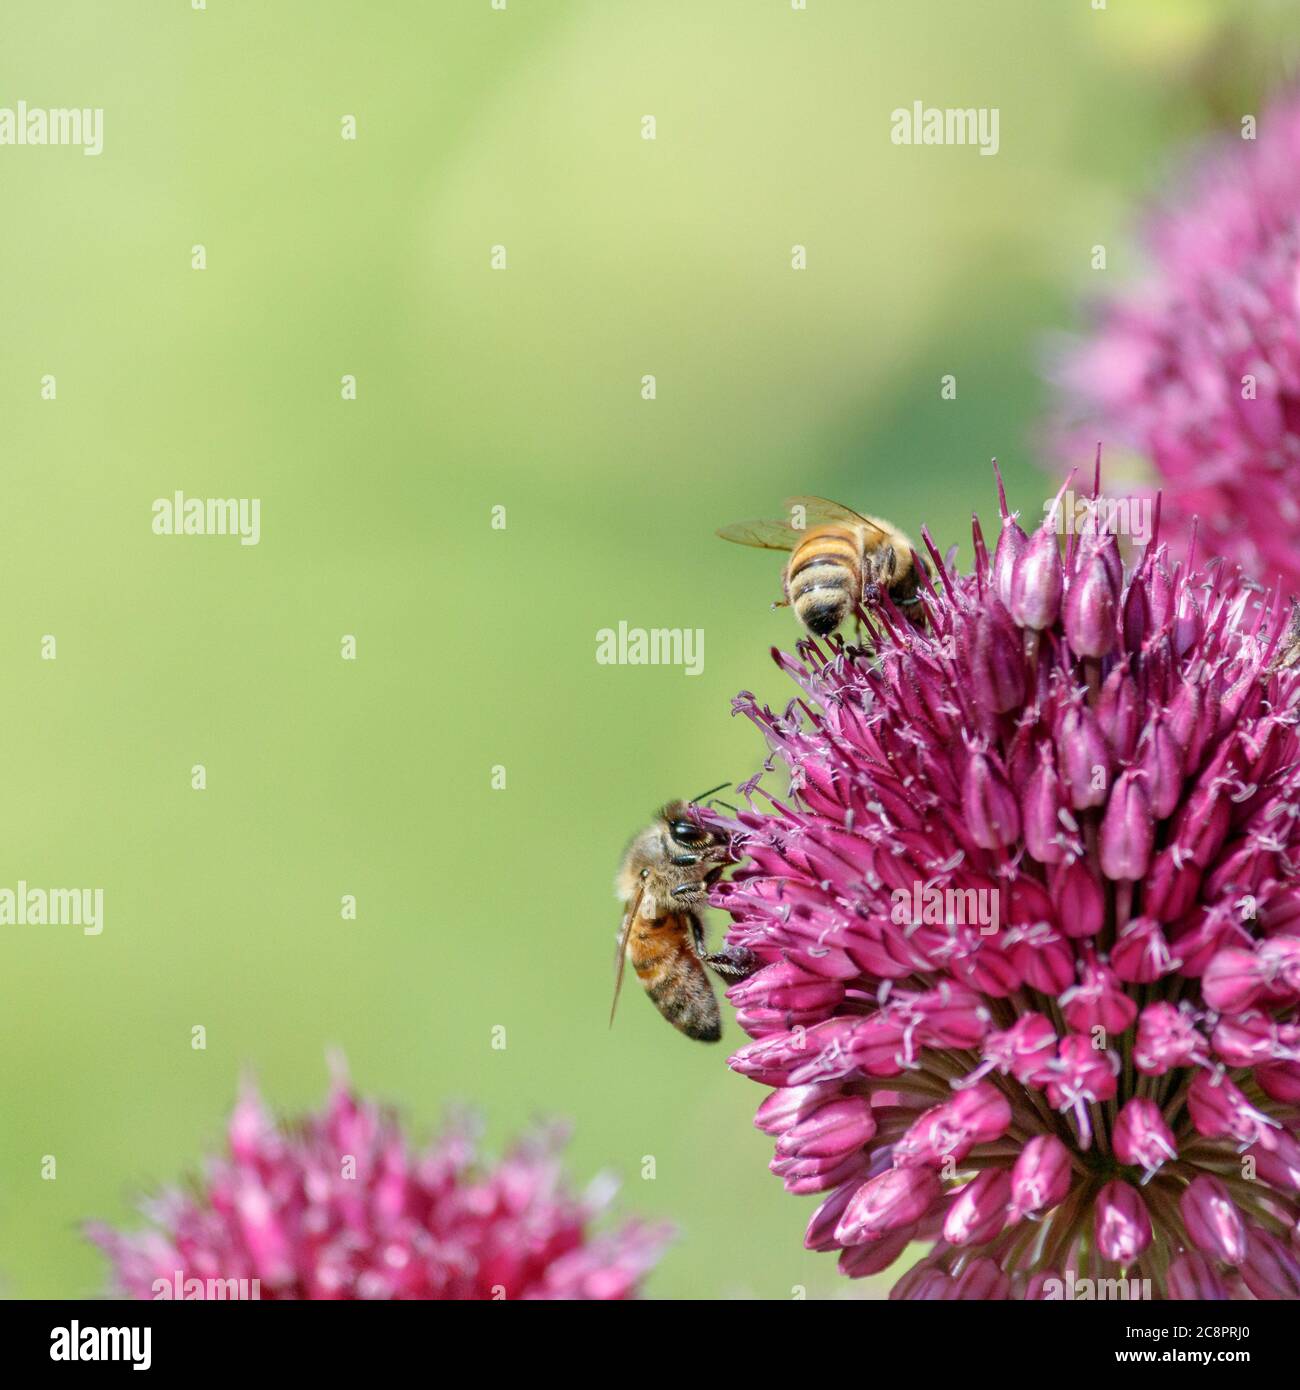 Two honey bees are busy gathering nectar and pollinating a bright purple Drumstick allium (A. sphaerocephalon), with blurred green background. Stock Photo